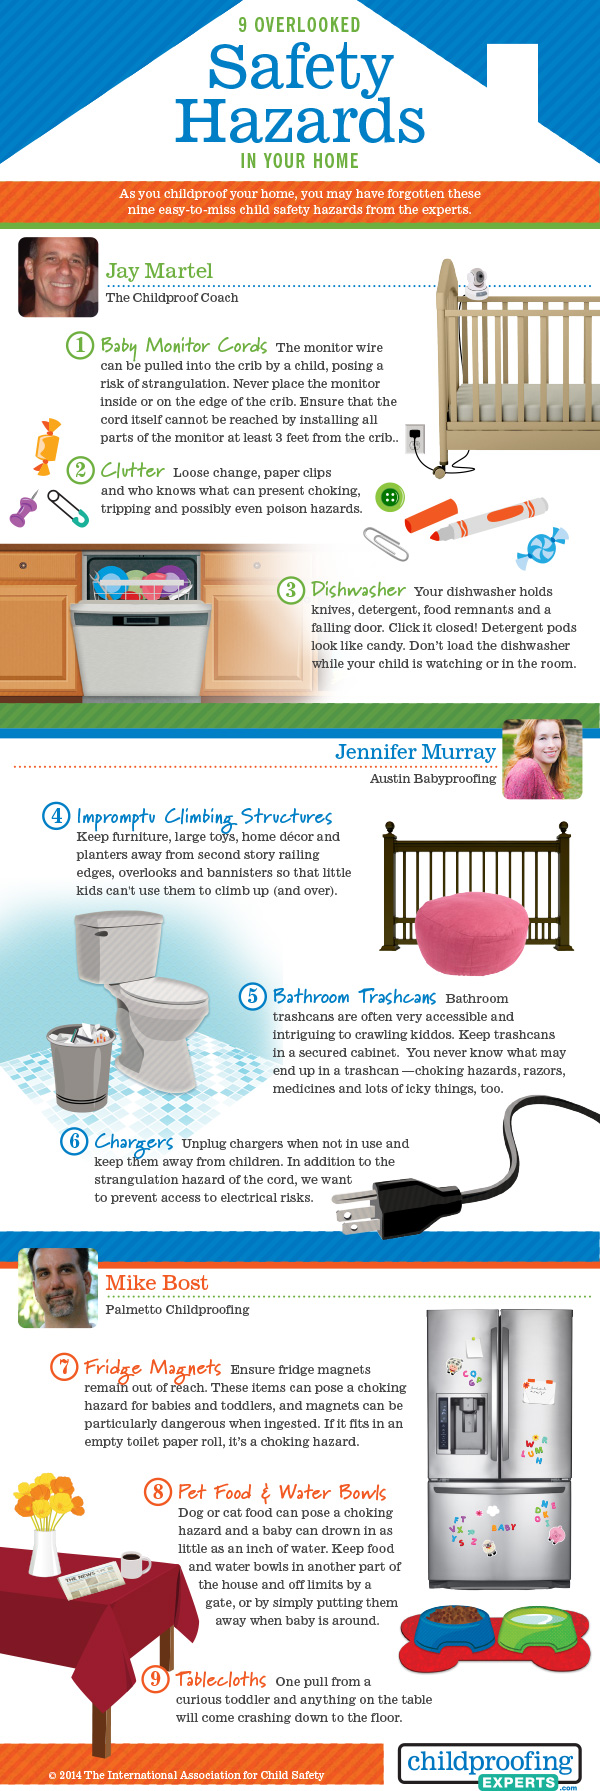 9 Overlooked Child Safety Hazards In Your Home